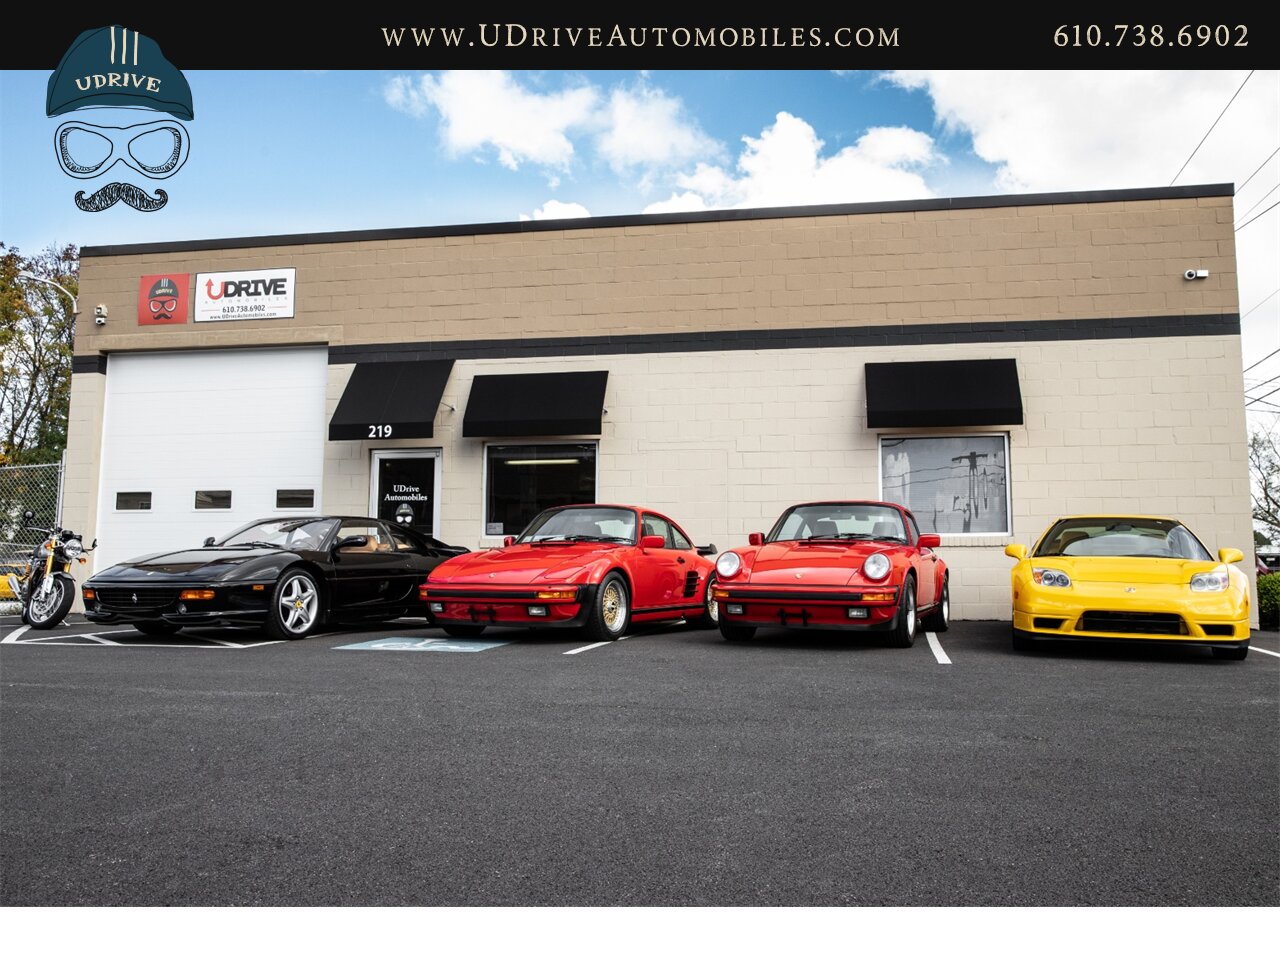 2002 Acura NSX NSX-T 9k Miles 6 Speed Manual Service History  Collector Grade - Photo 68 - West Chester, PA 19382